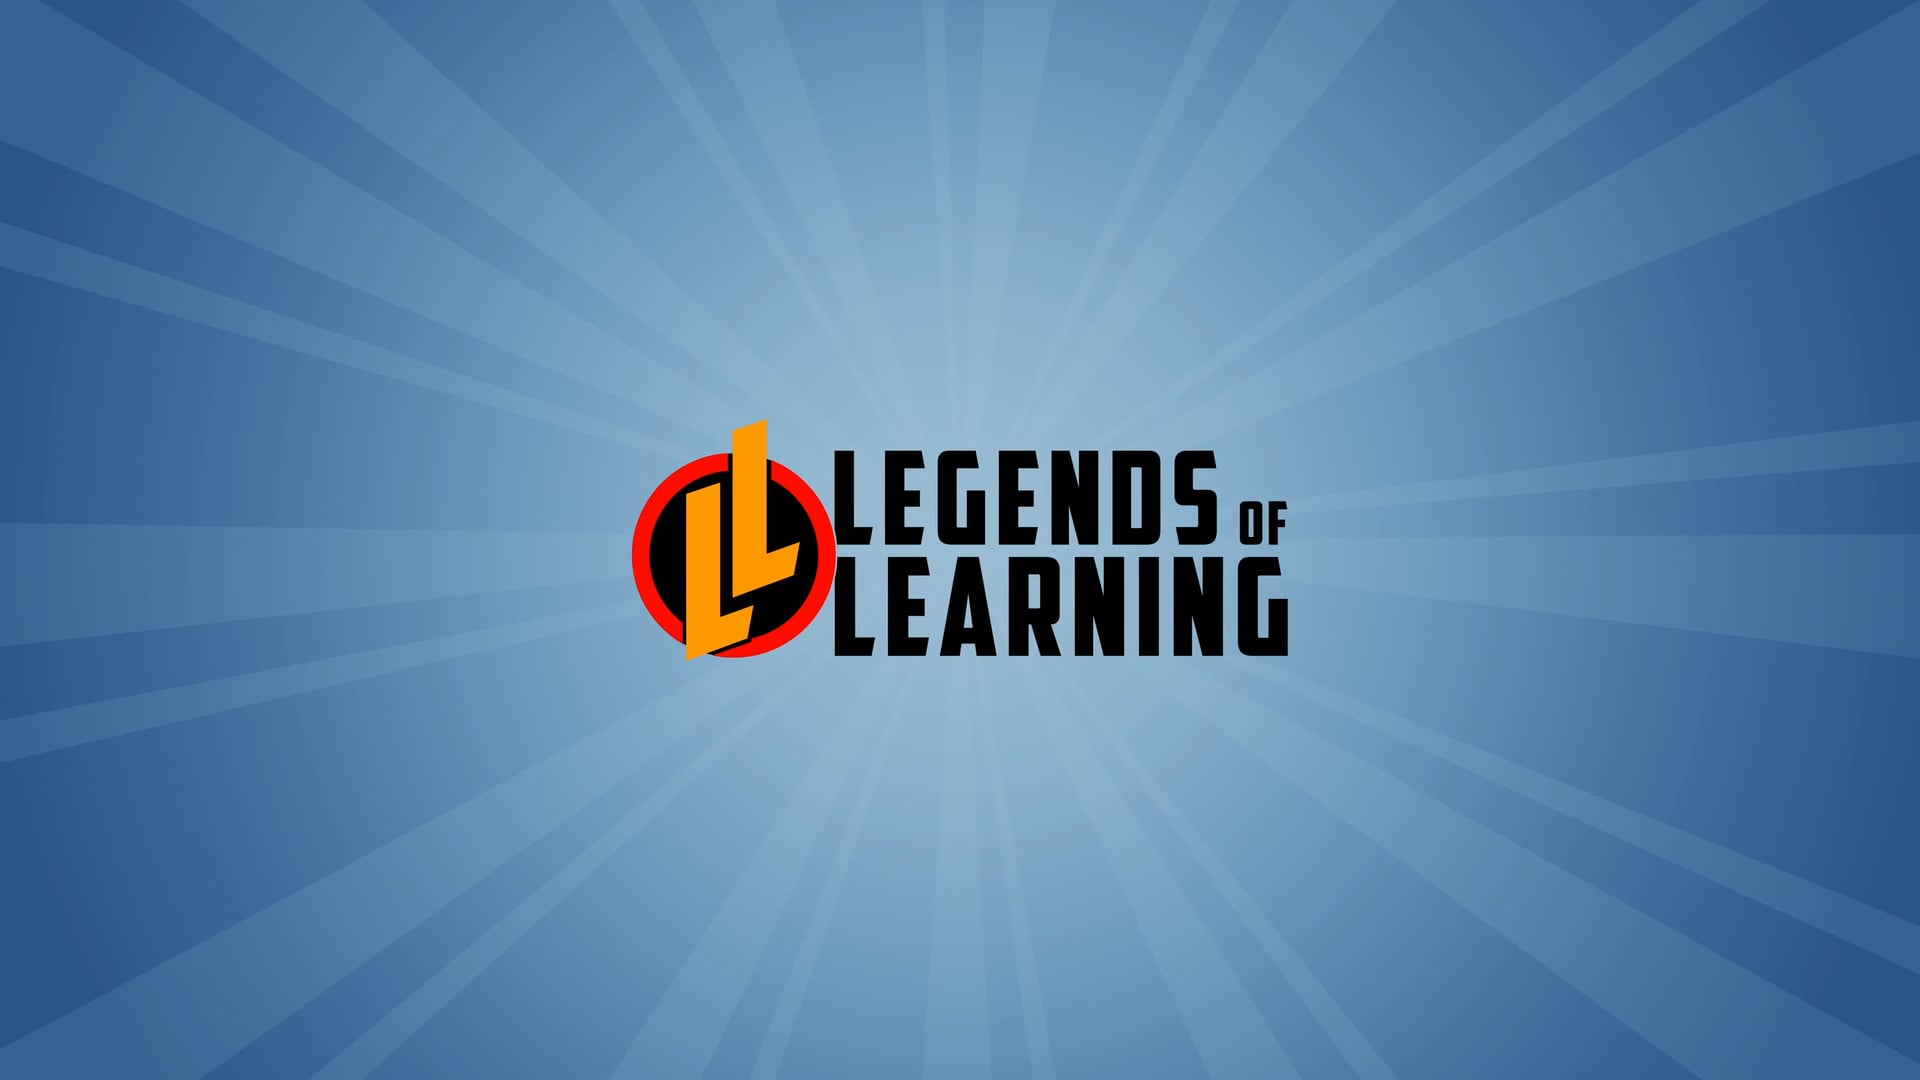 About Legends of Learning on Vimeo